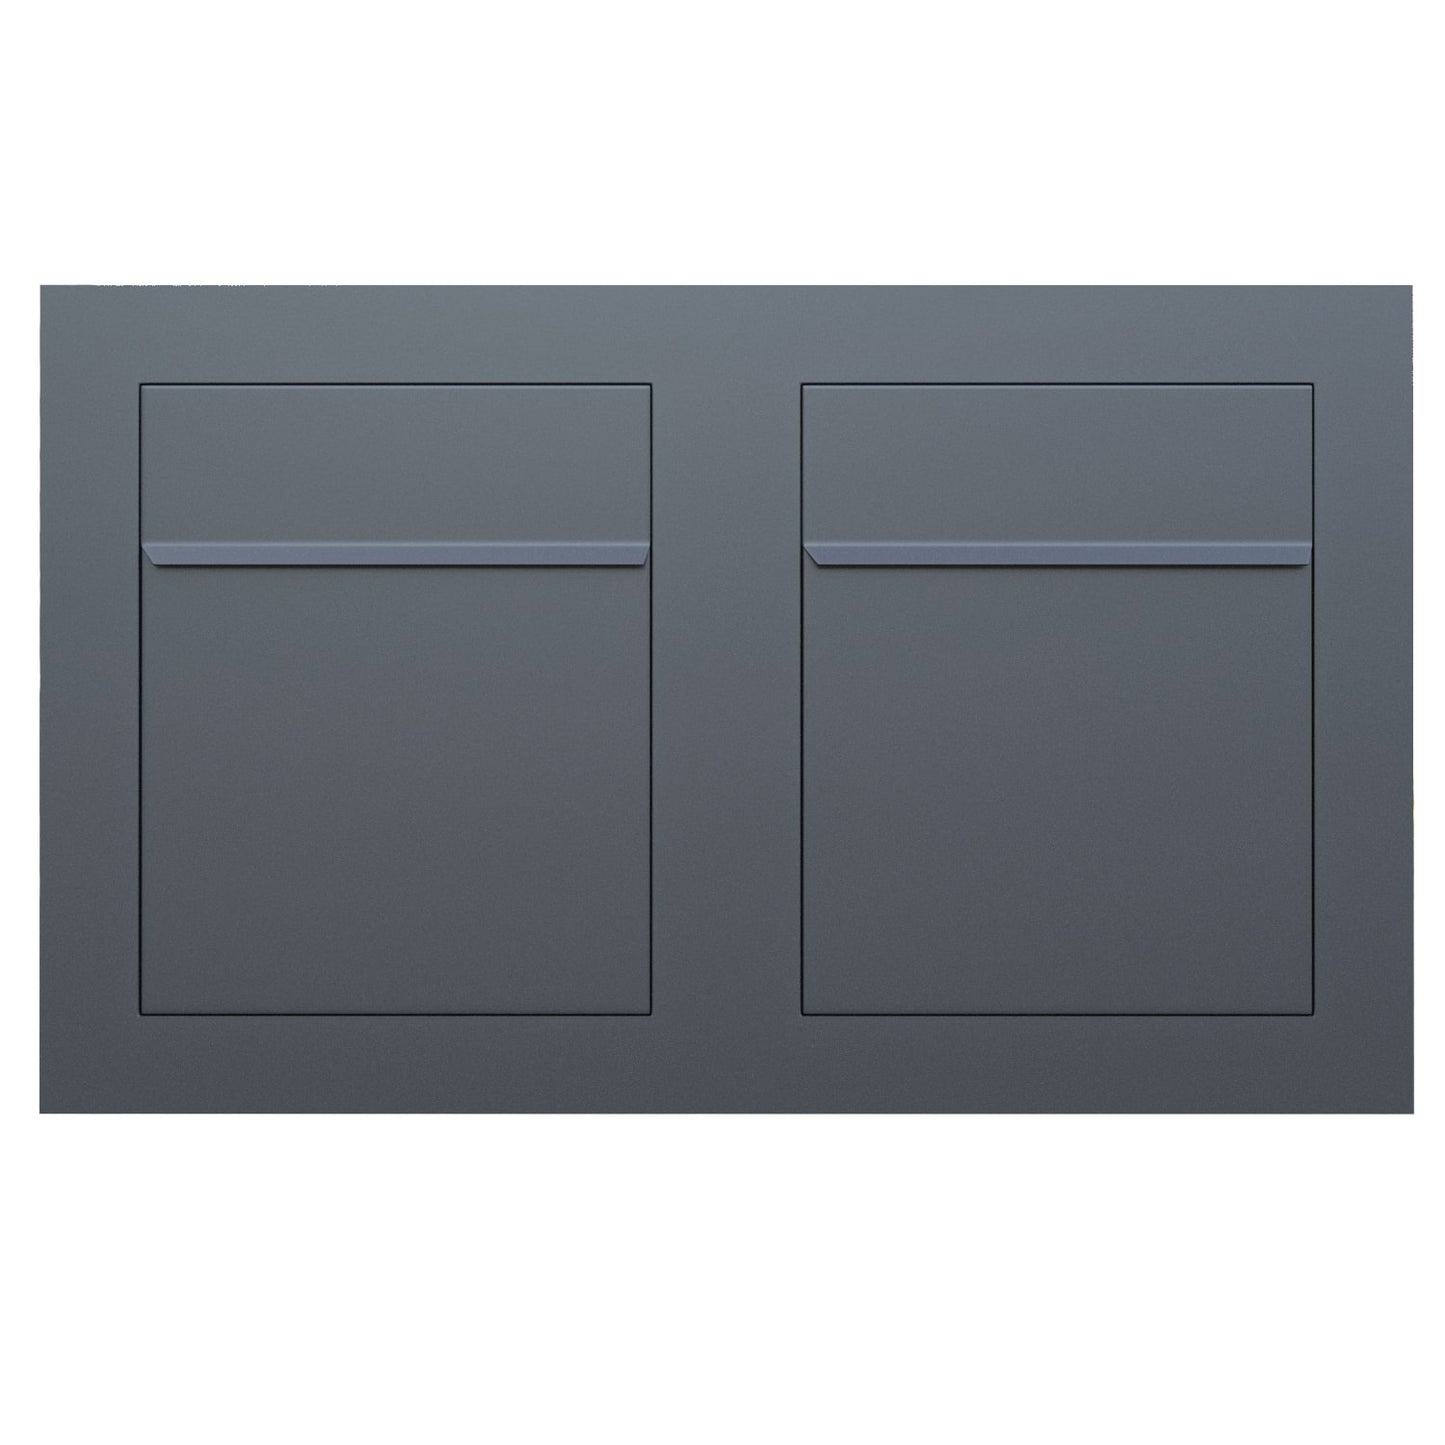 BARI 2 - Contemporary built-in mailbox in anthracite